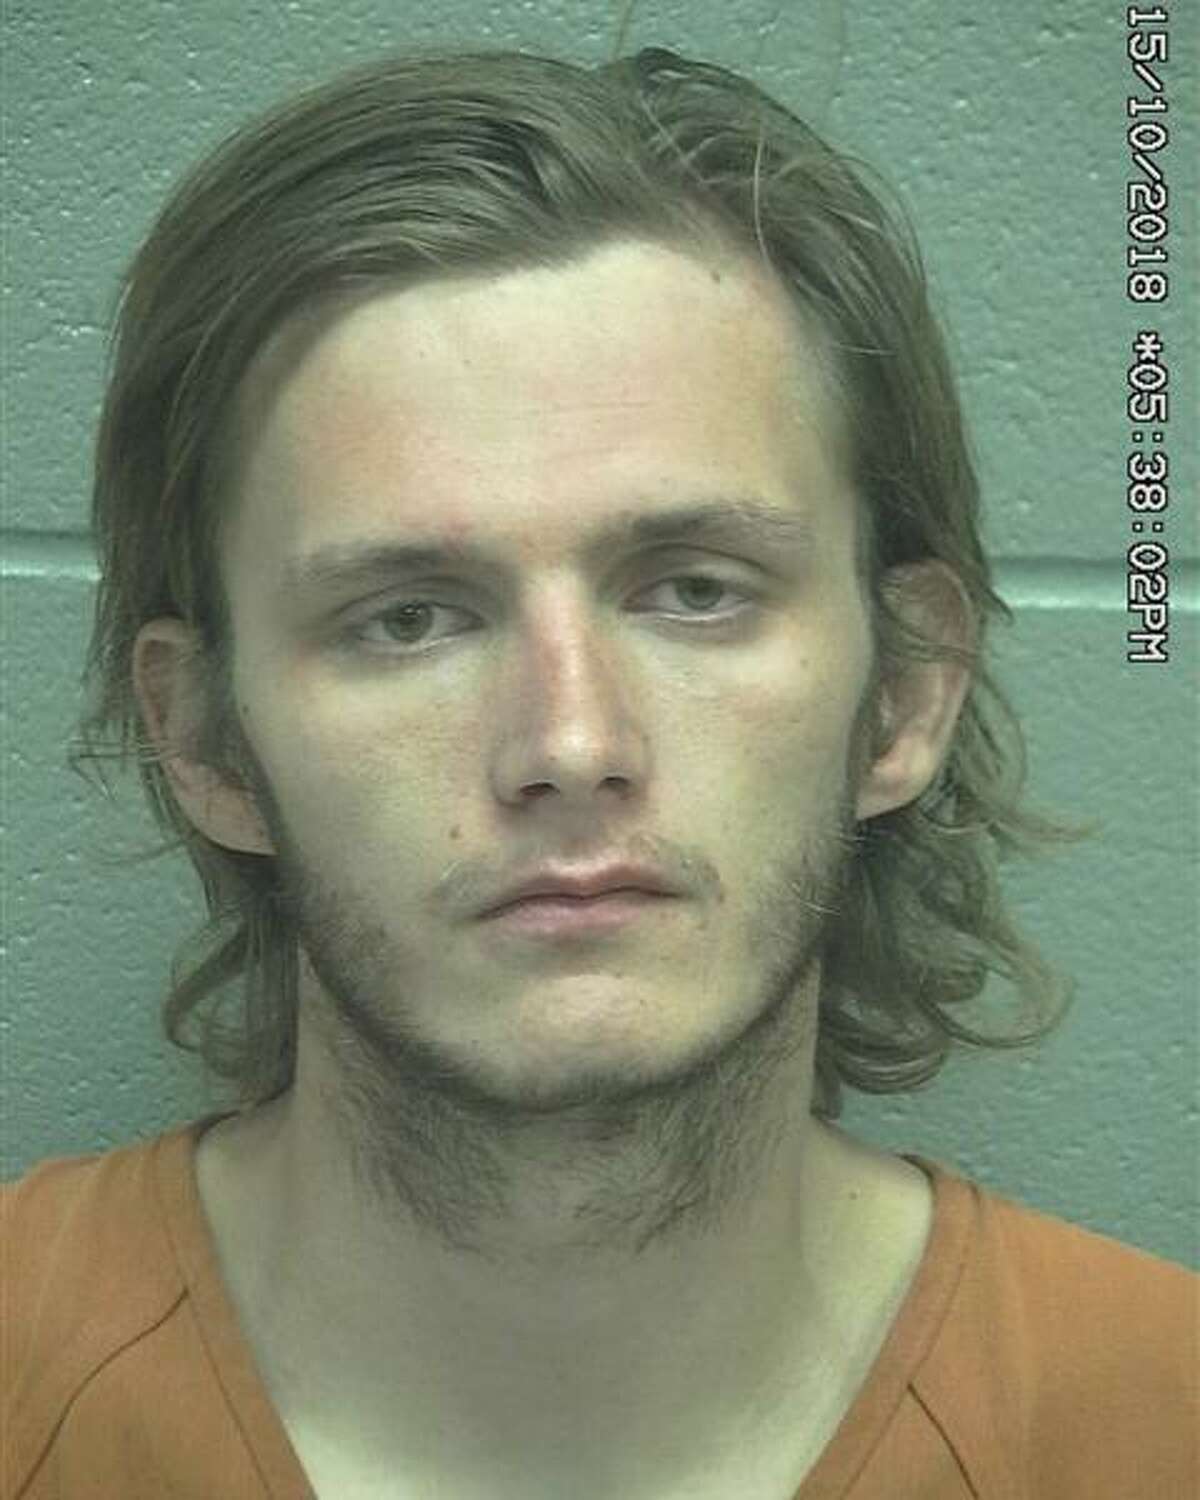 Skyler Don Conklin, 22, was arrested Oct. 14 after he allegedly sliced a man with a knife, according to court documents.